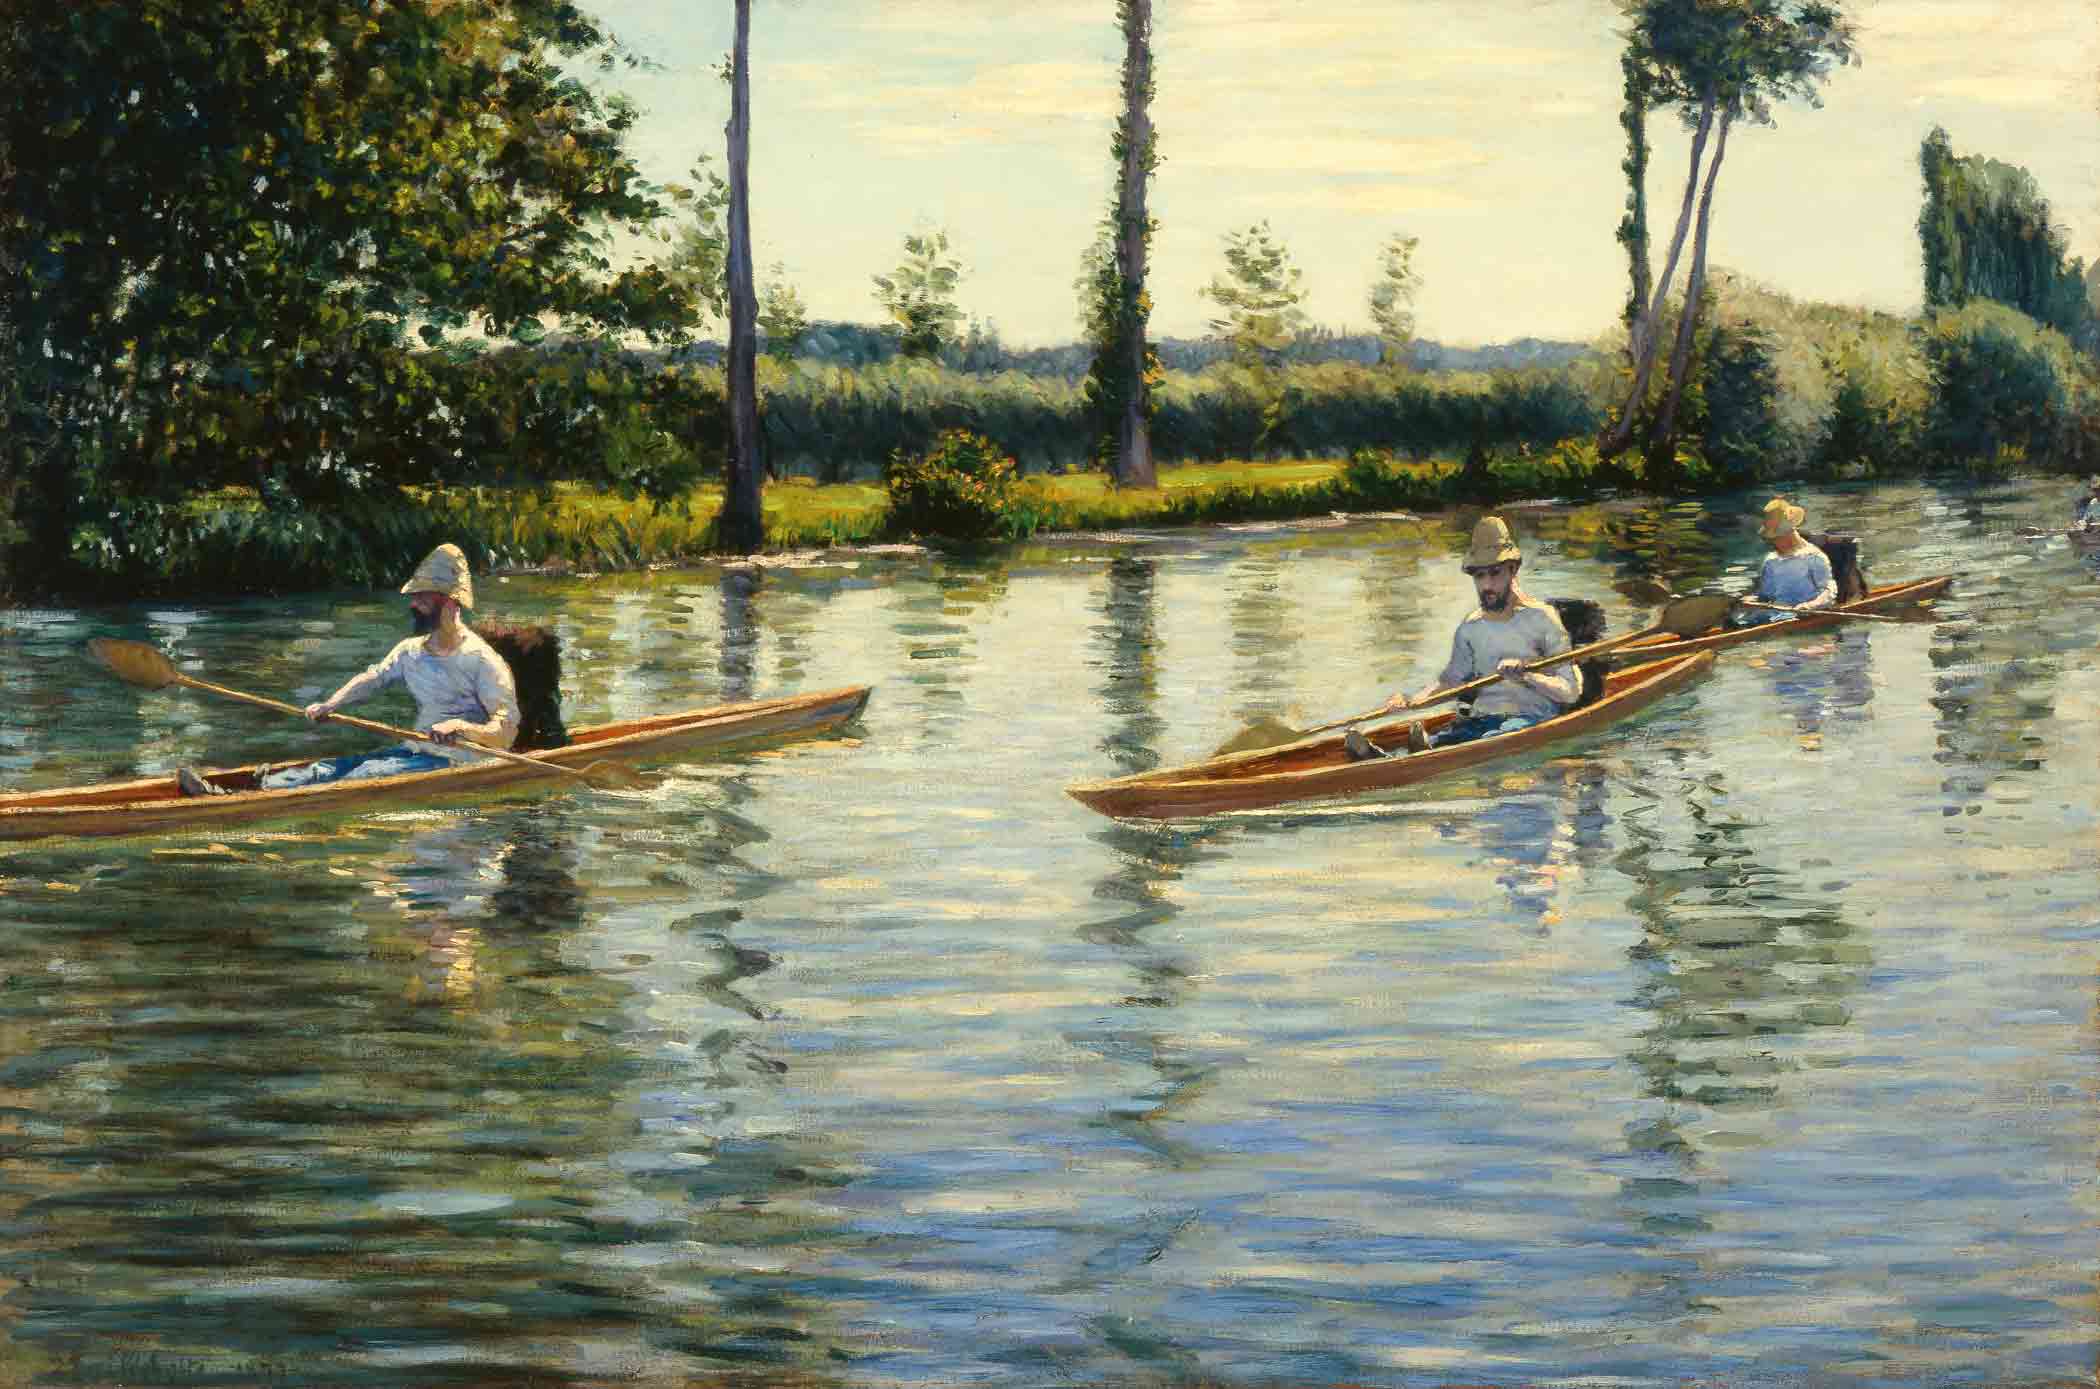 Plimbare cu barca pe Yerres by Gustave Caillebotte - 1877 - 40 3/4 × 61 3/8 in 